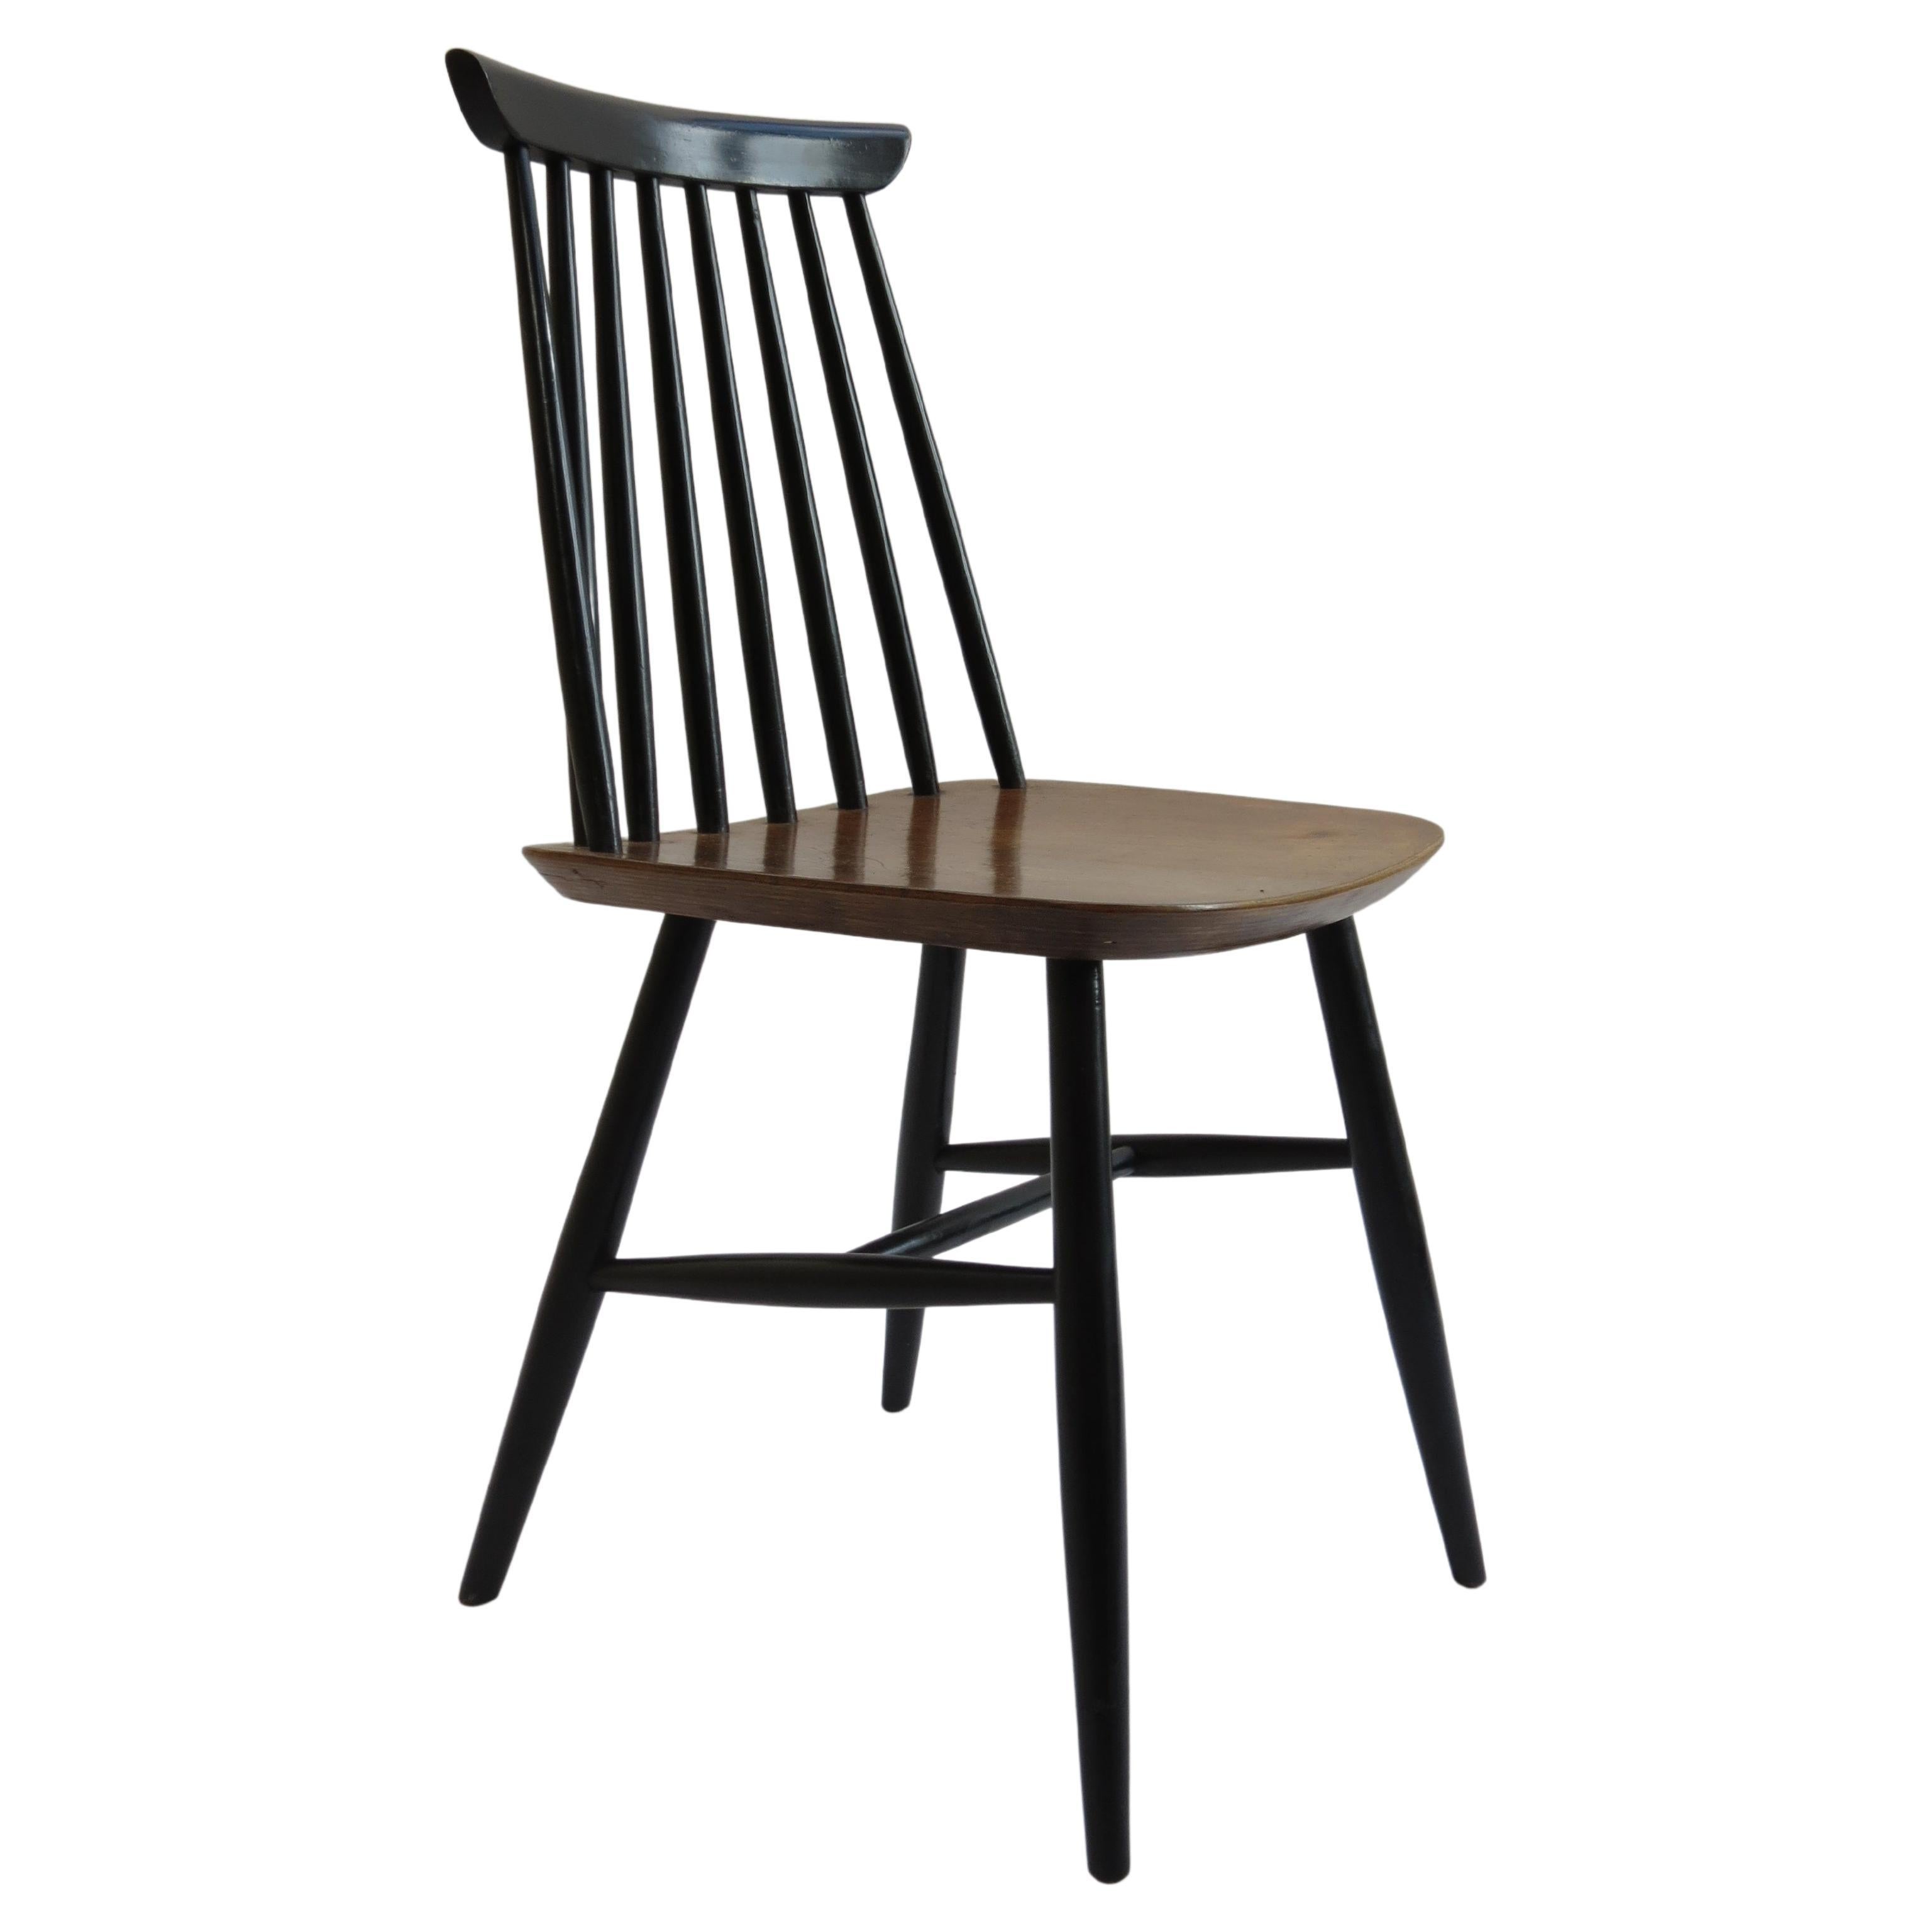 The 1950s Black and Walnut Dining Chair in the Style of Imari Tapiovaara im Angebot